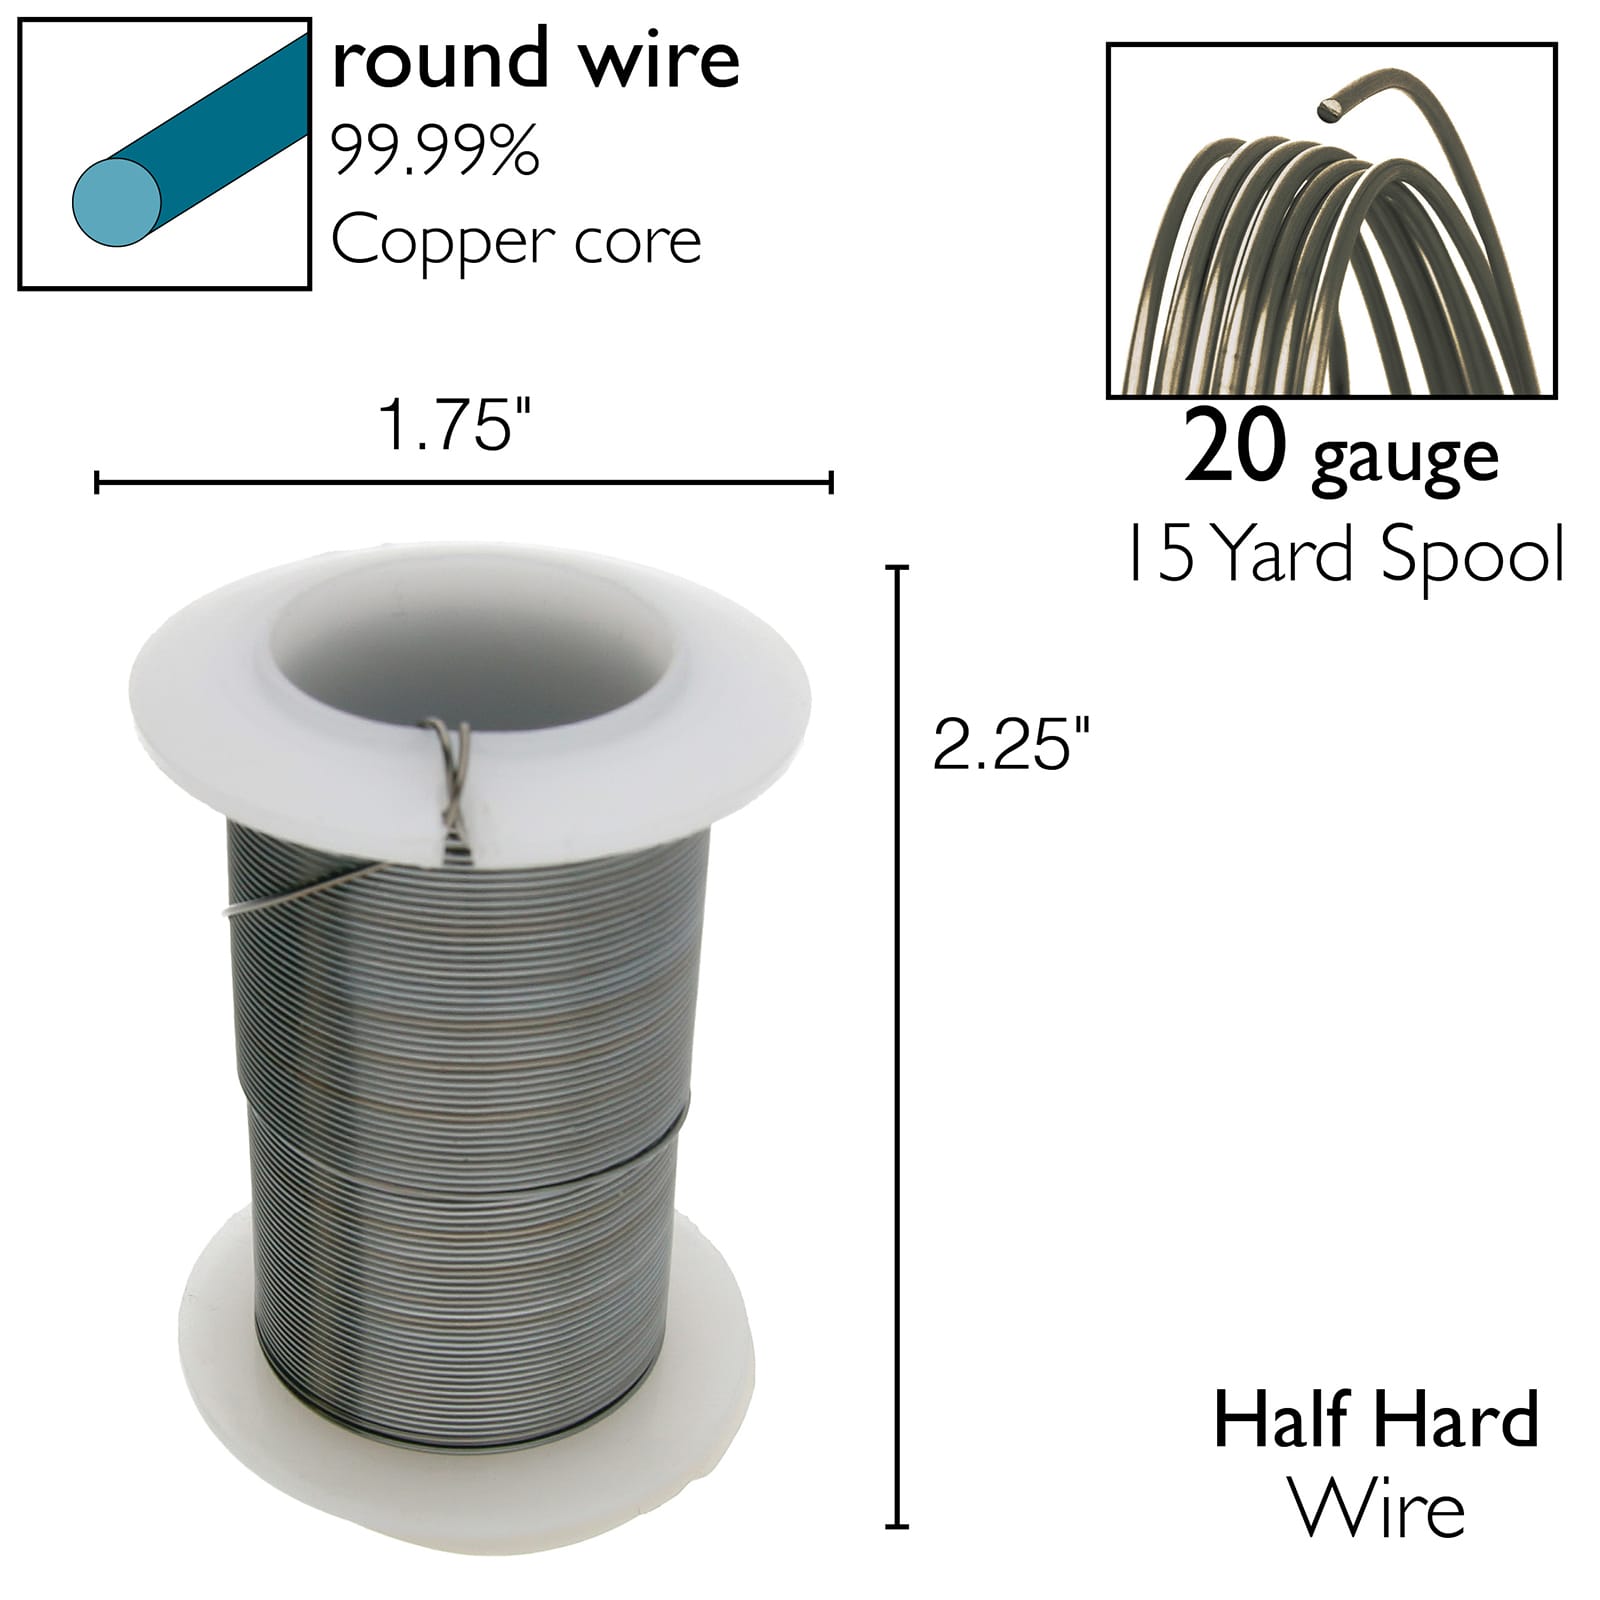 The Beadsmith® Wire Elements™ 20 Gauge Tarnish Resistant Soft Temper Wire,  6yd.